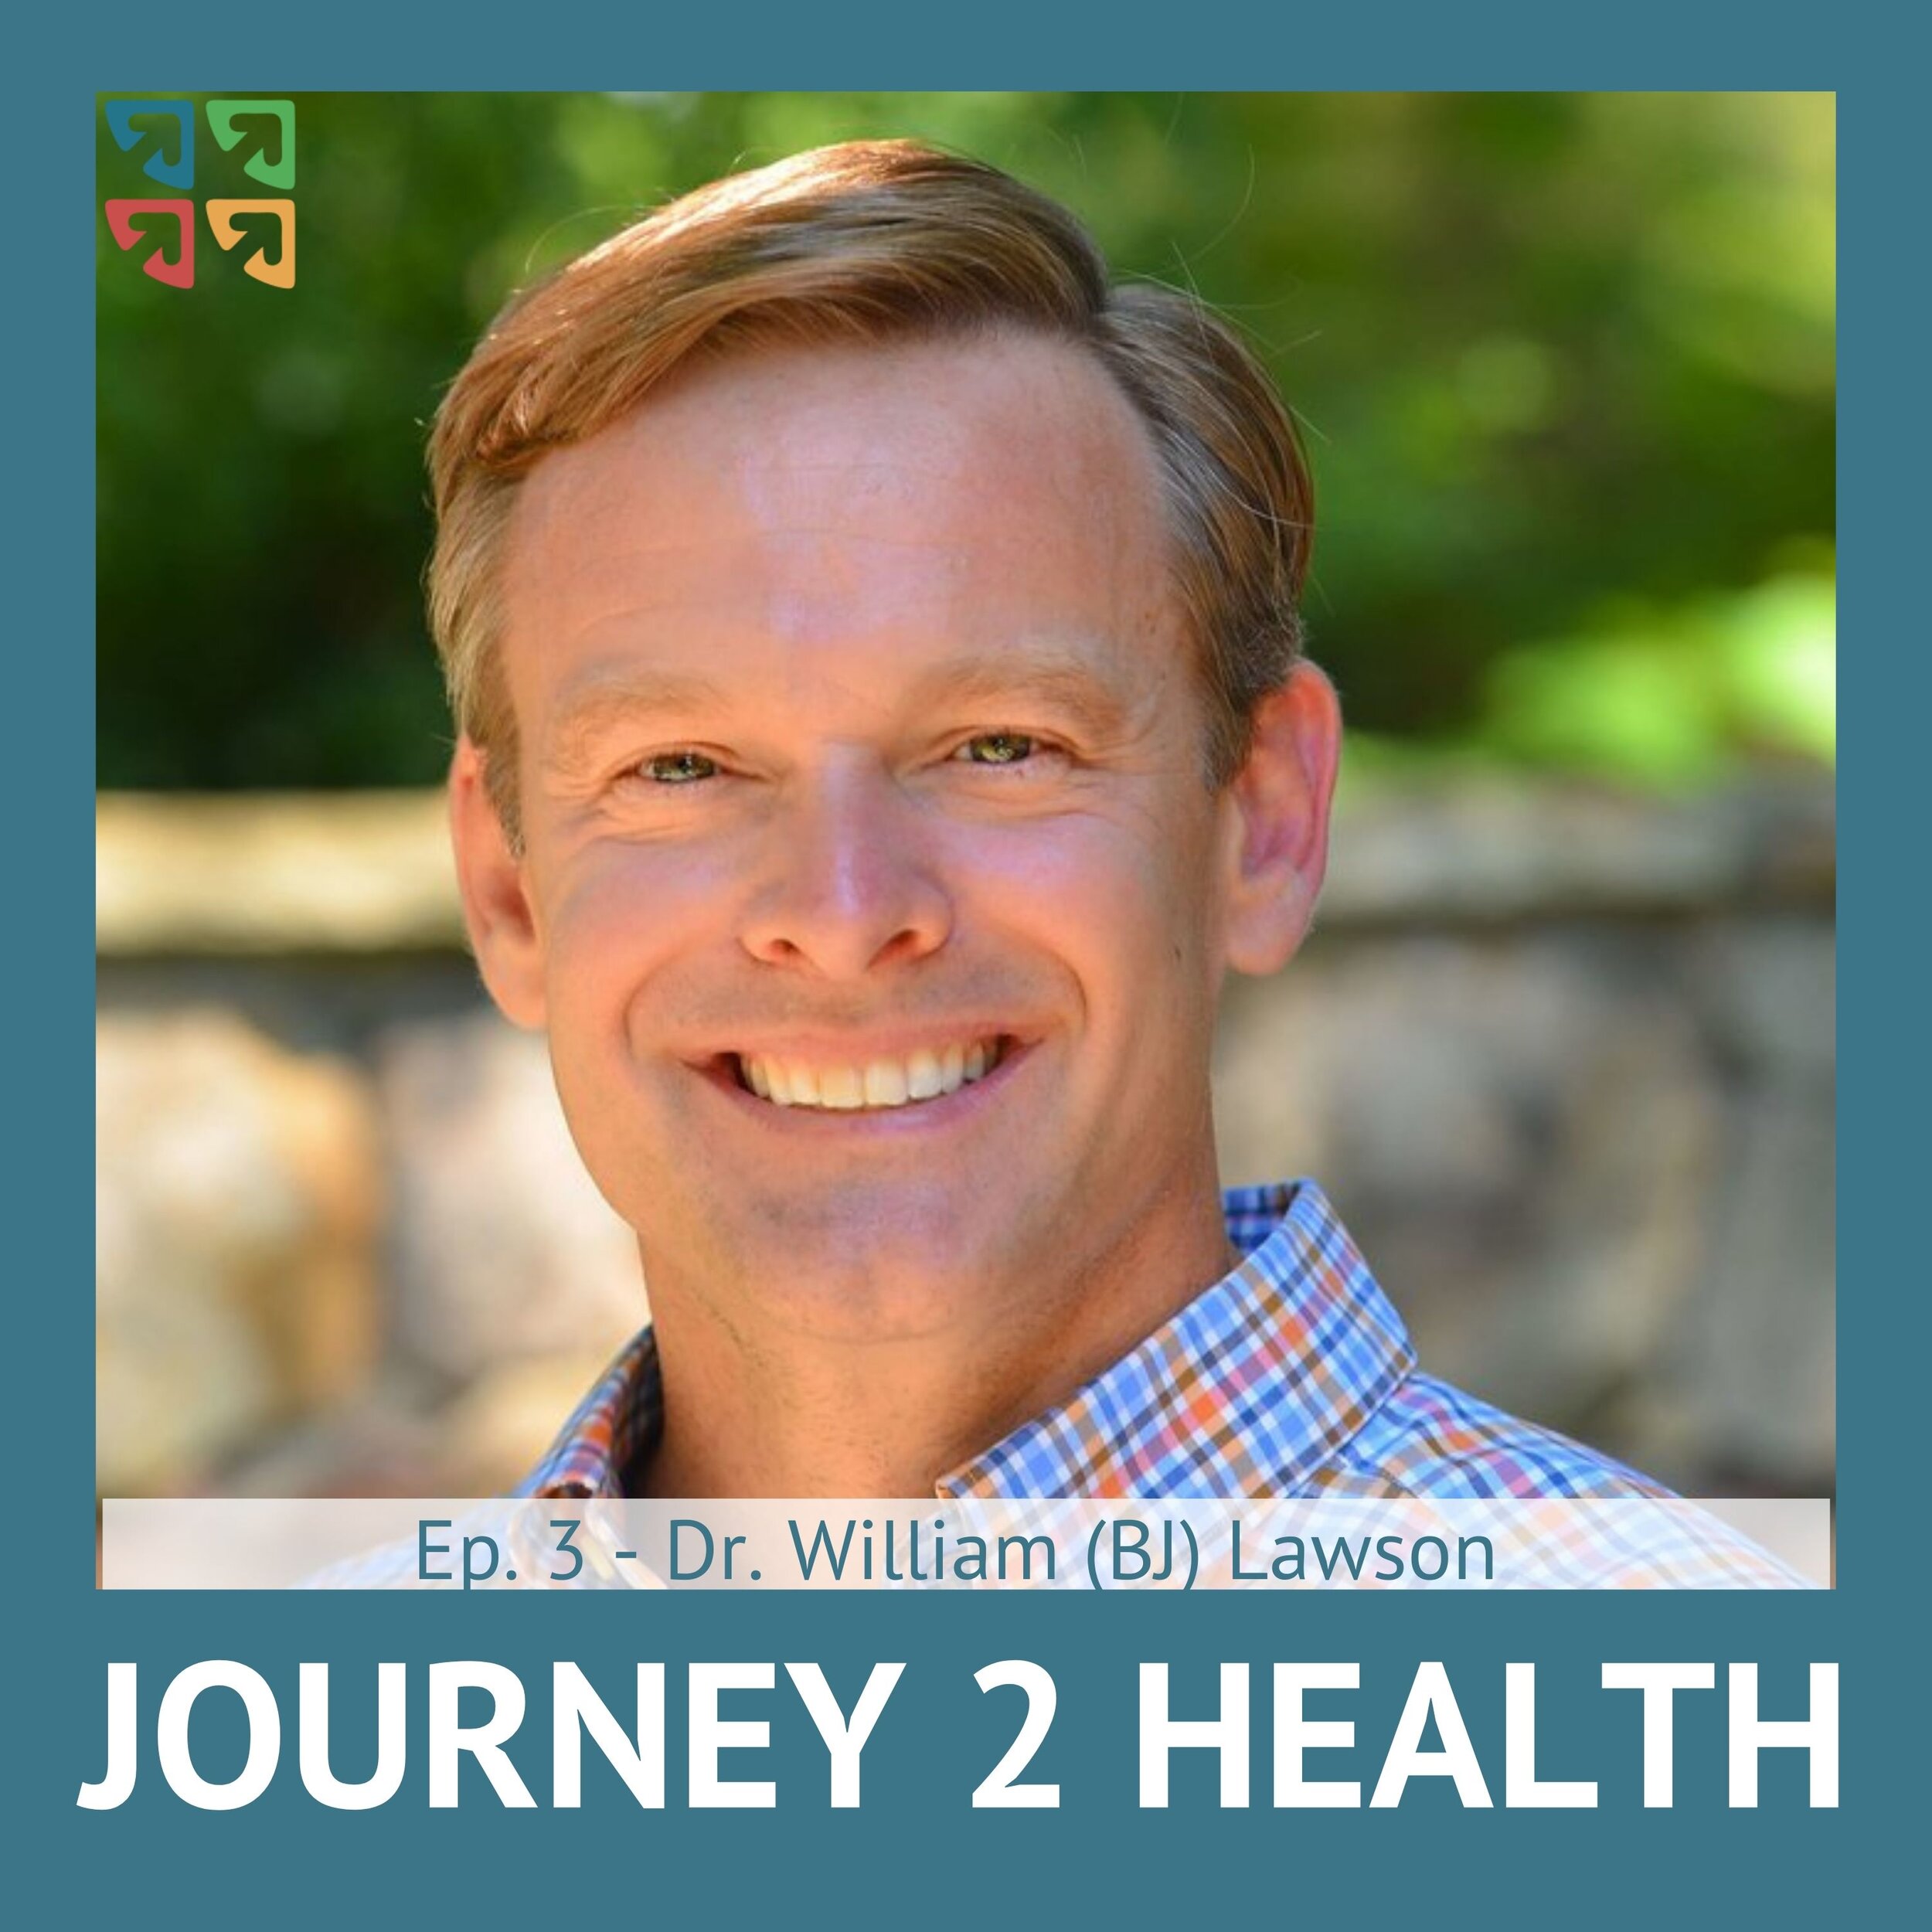 Purpose Driven Work - Dr. William Lawson, Founder and CEO gives us an inside glimpse into the birth and purpose of EHOP Health.  It’s creating real value and real health by serving others…now that’s a purpose-driven company!